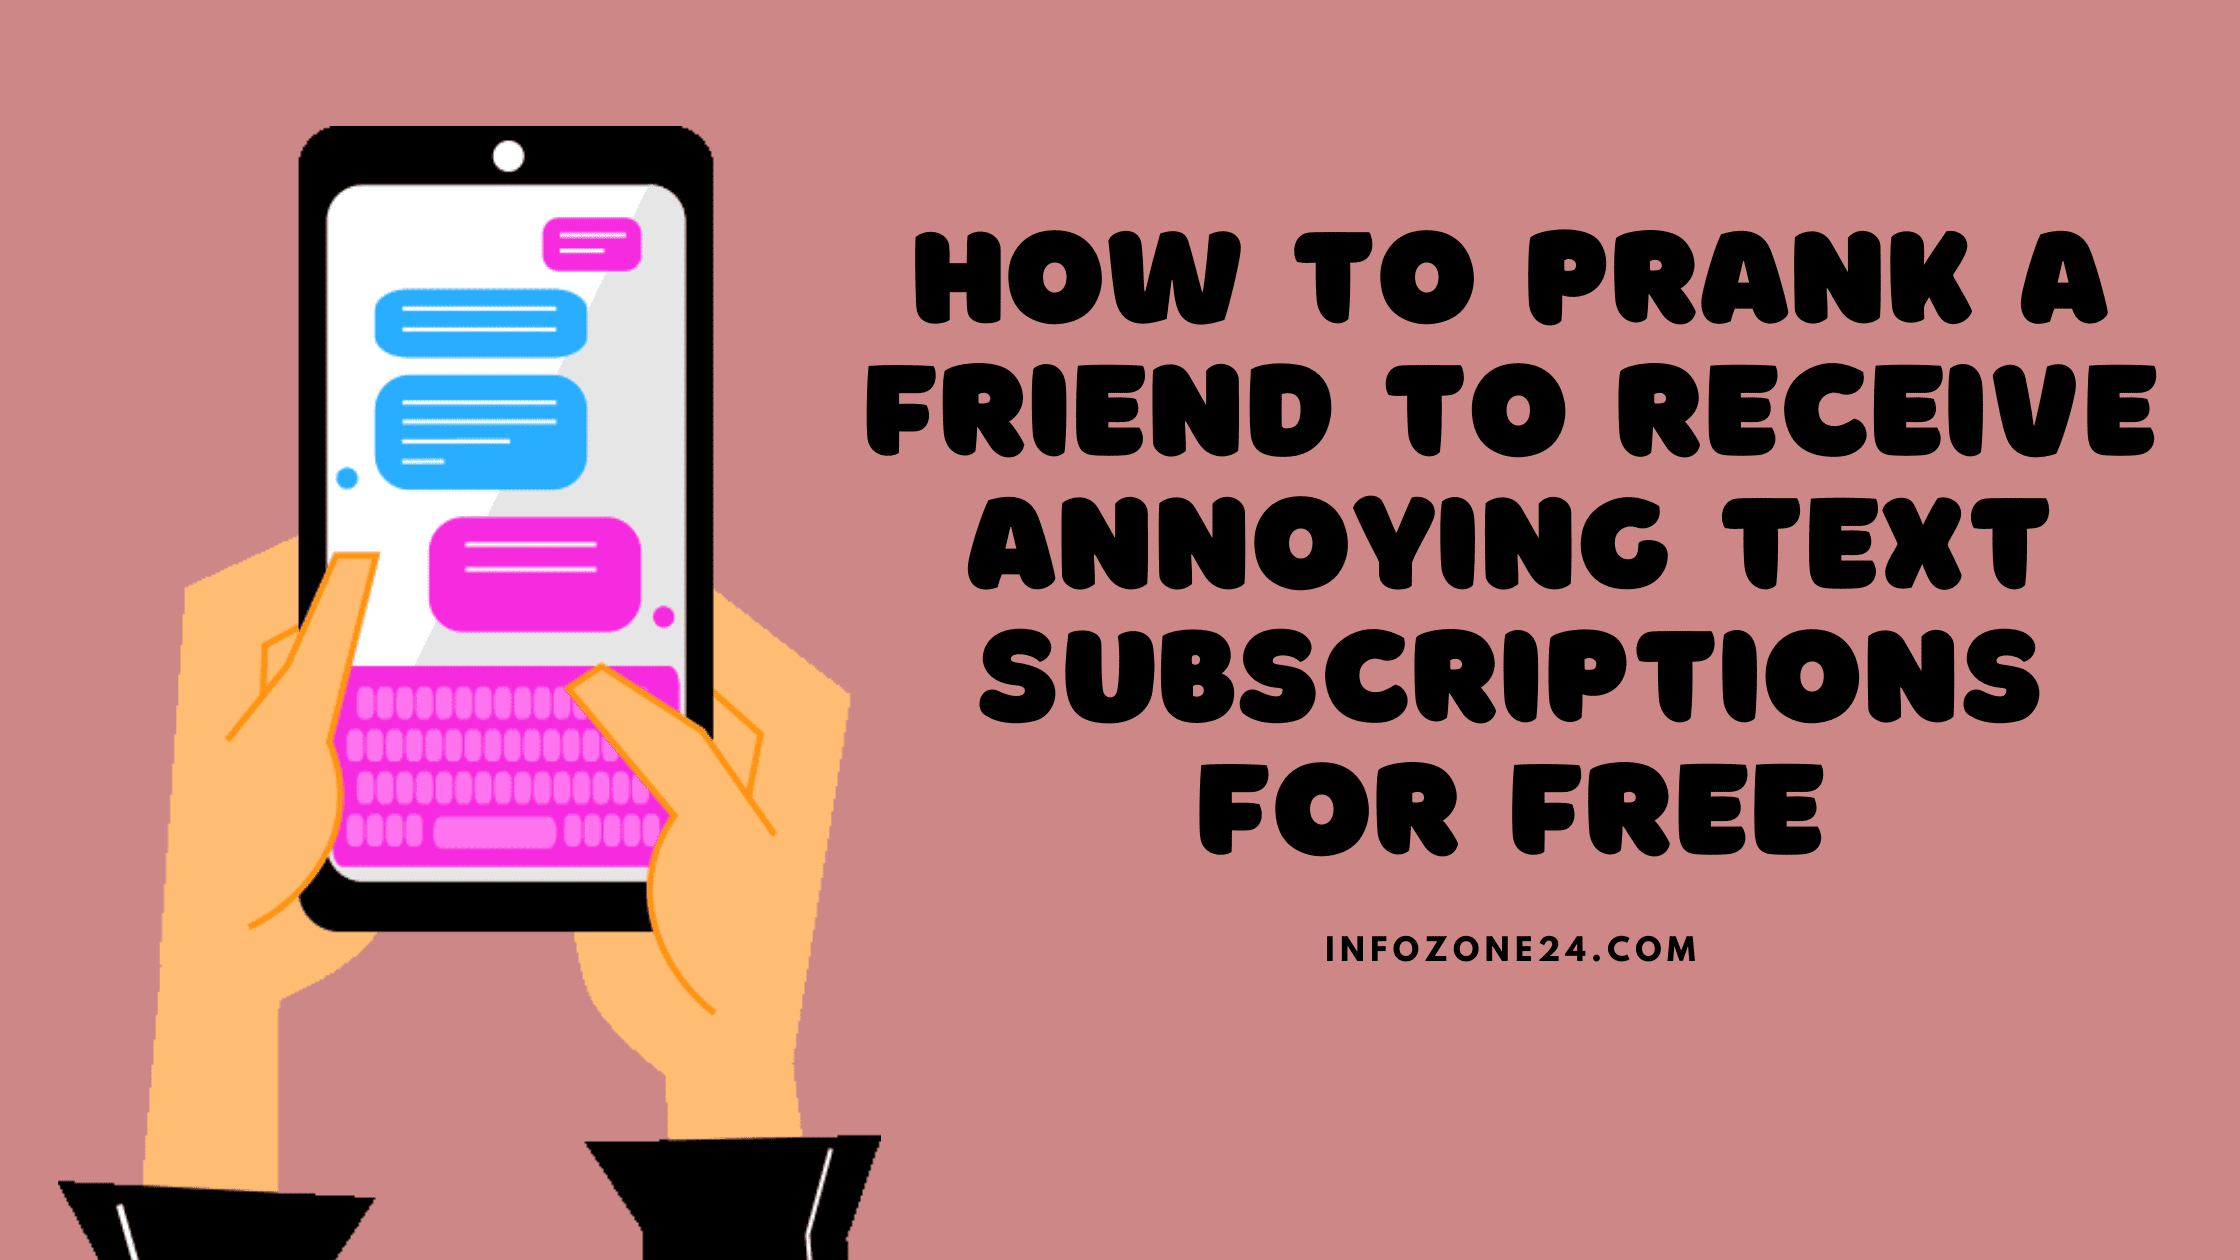 How-To-Prank-a-Friend-to-Receive-Annoying-Text-Subscriptions-For-Free.png